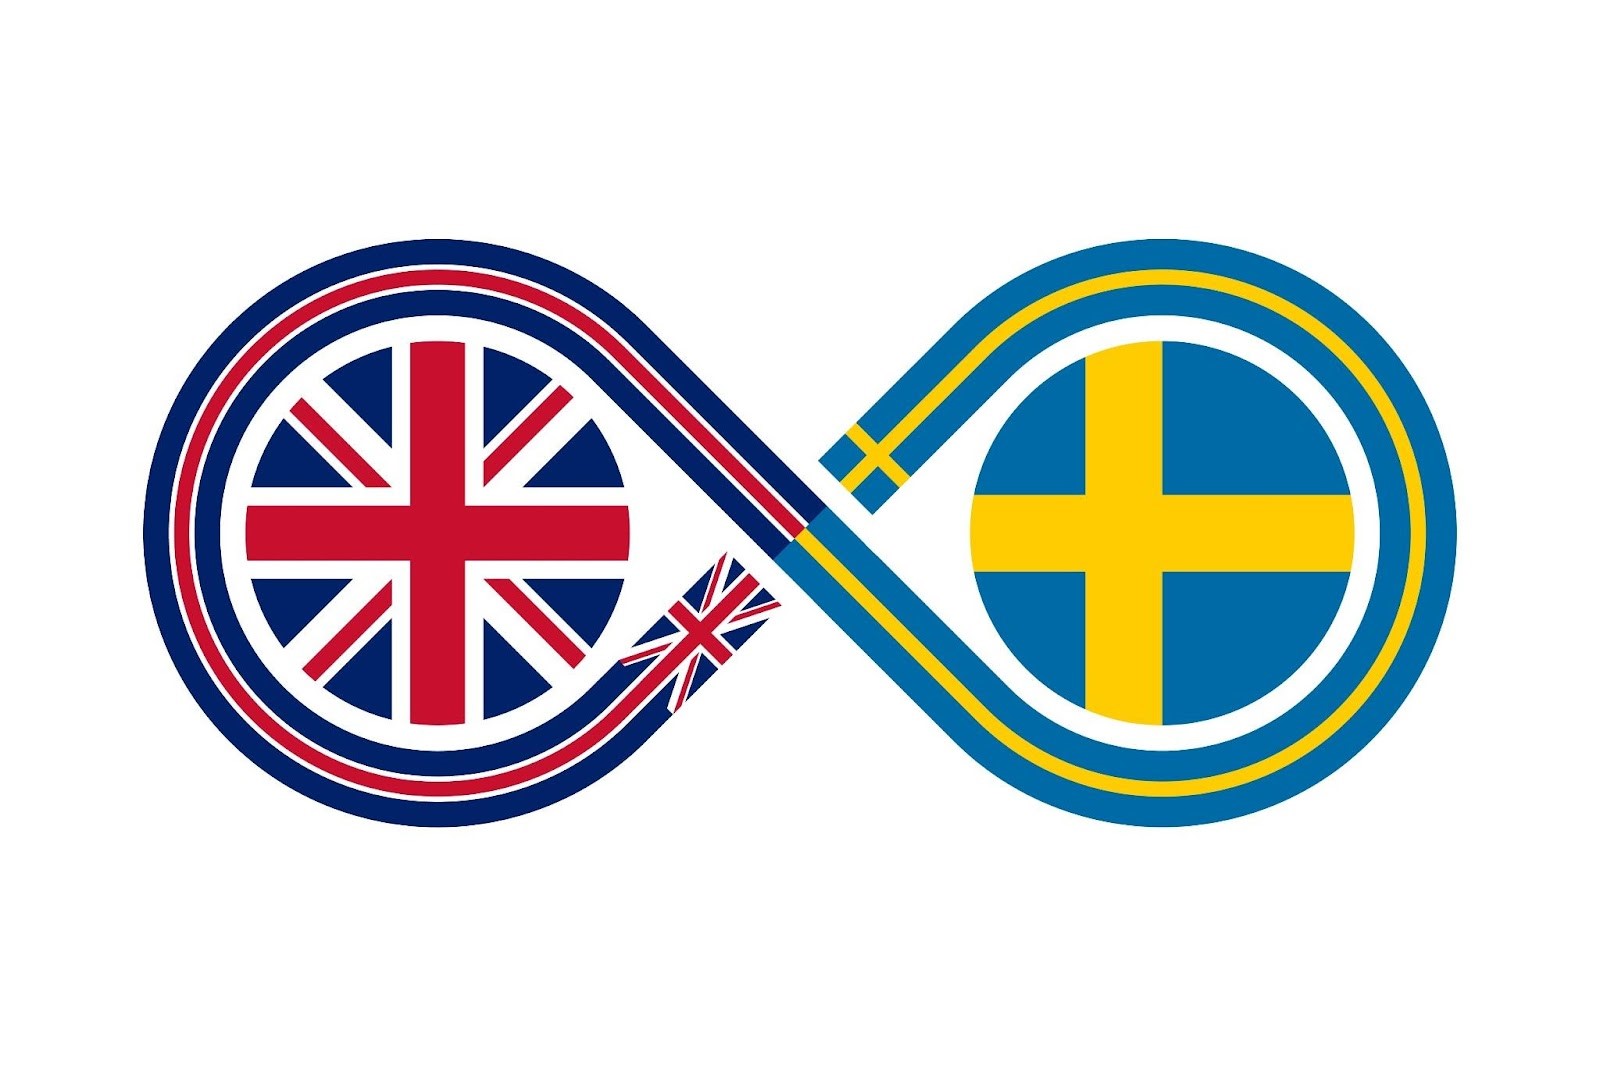 Translating between Swedish and English – 3 common mistakes and how to avoid them